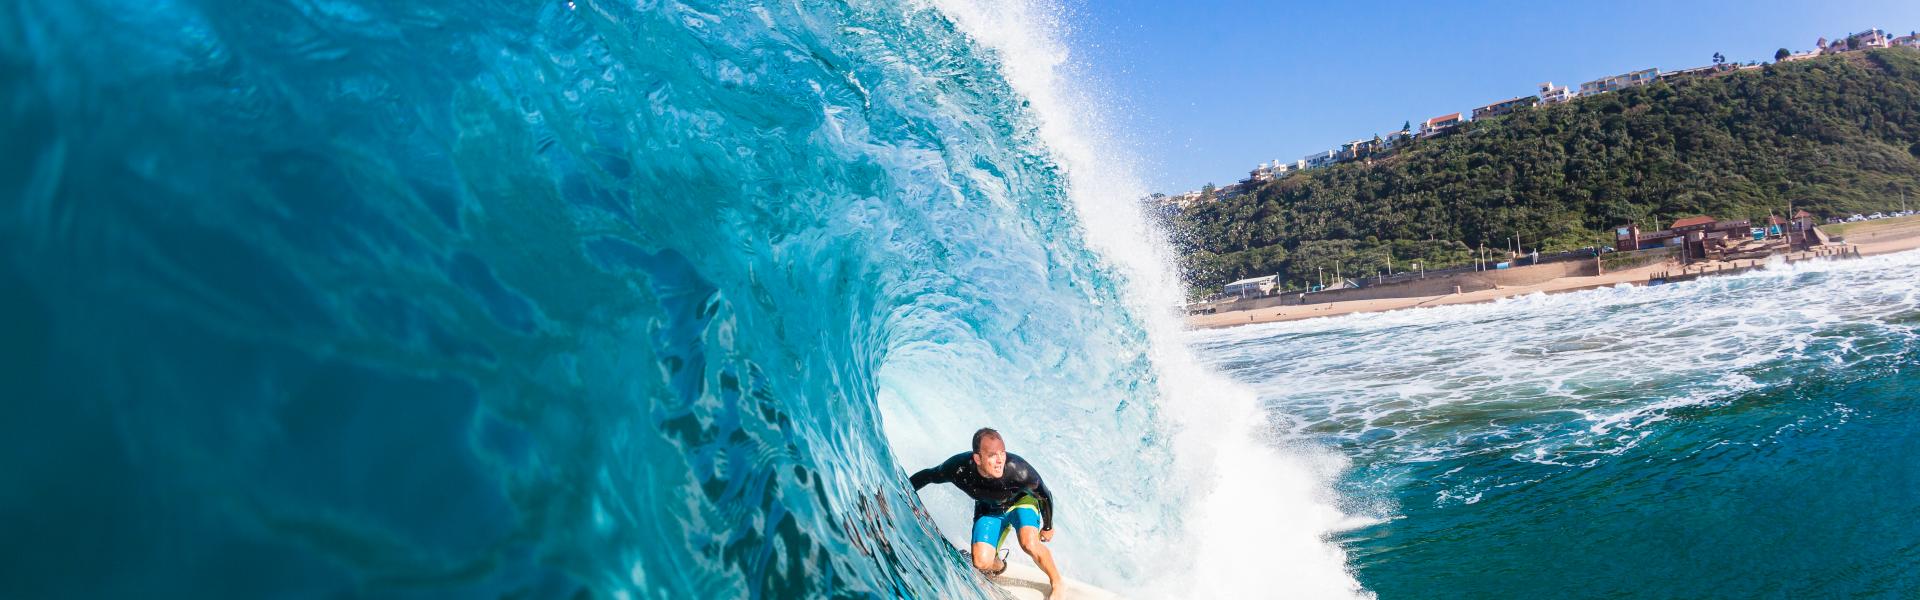 Surfing Vacations in Panama - HomeToGo